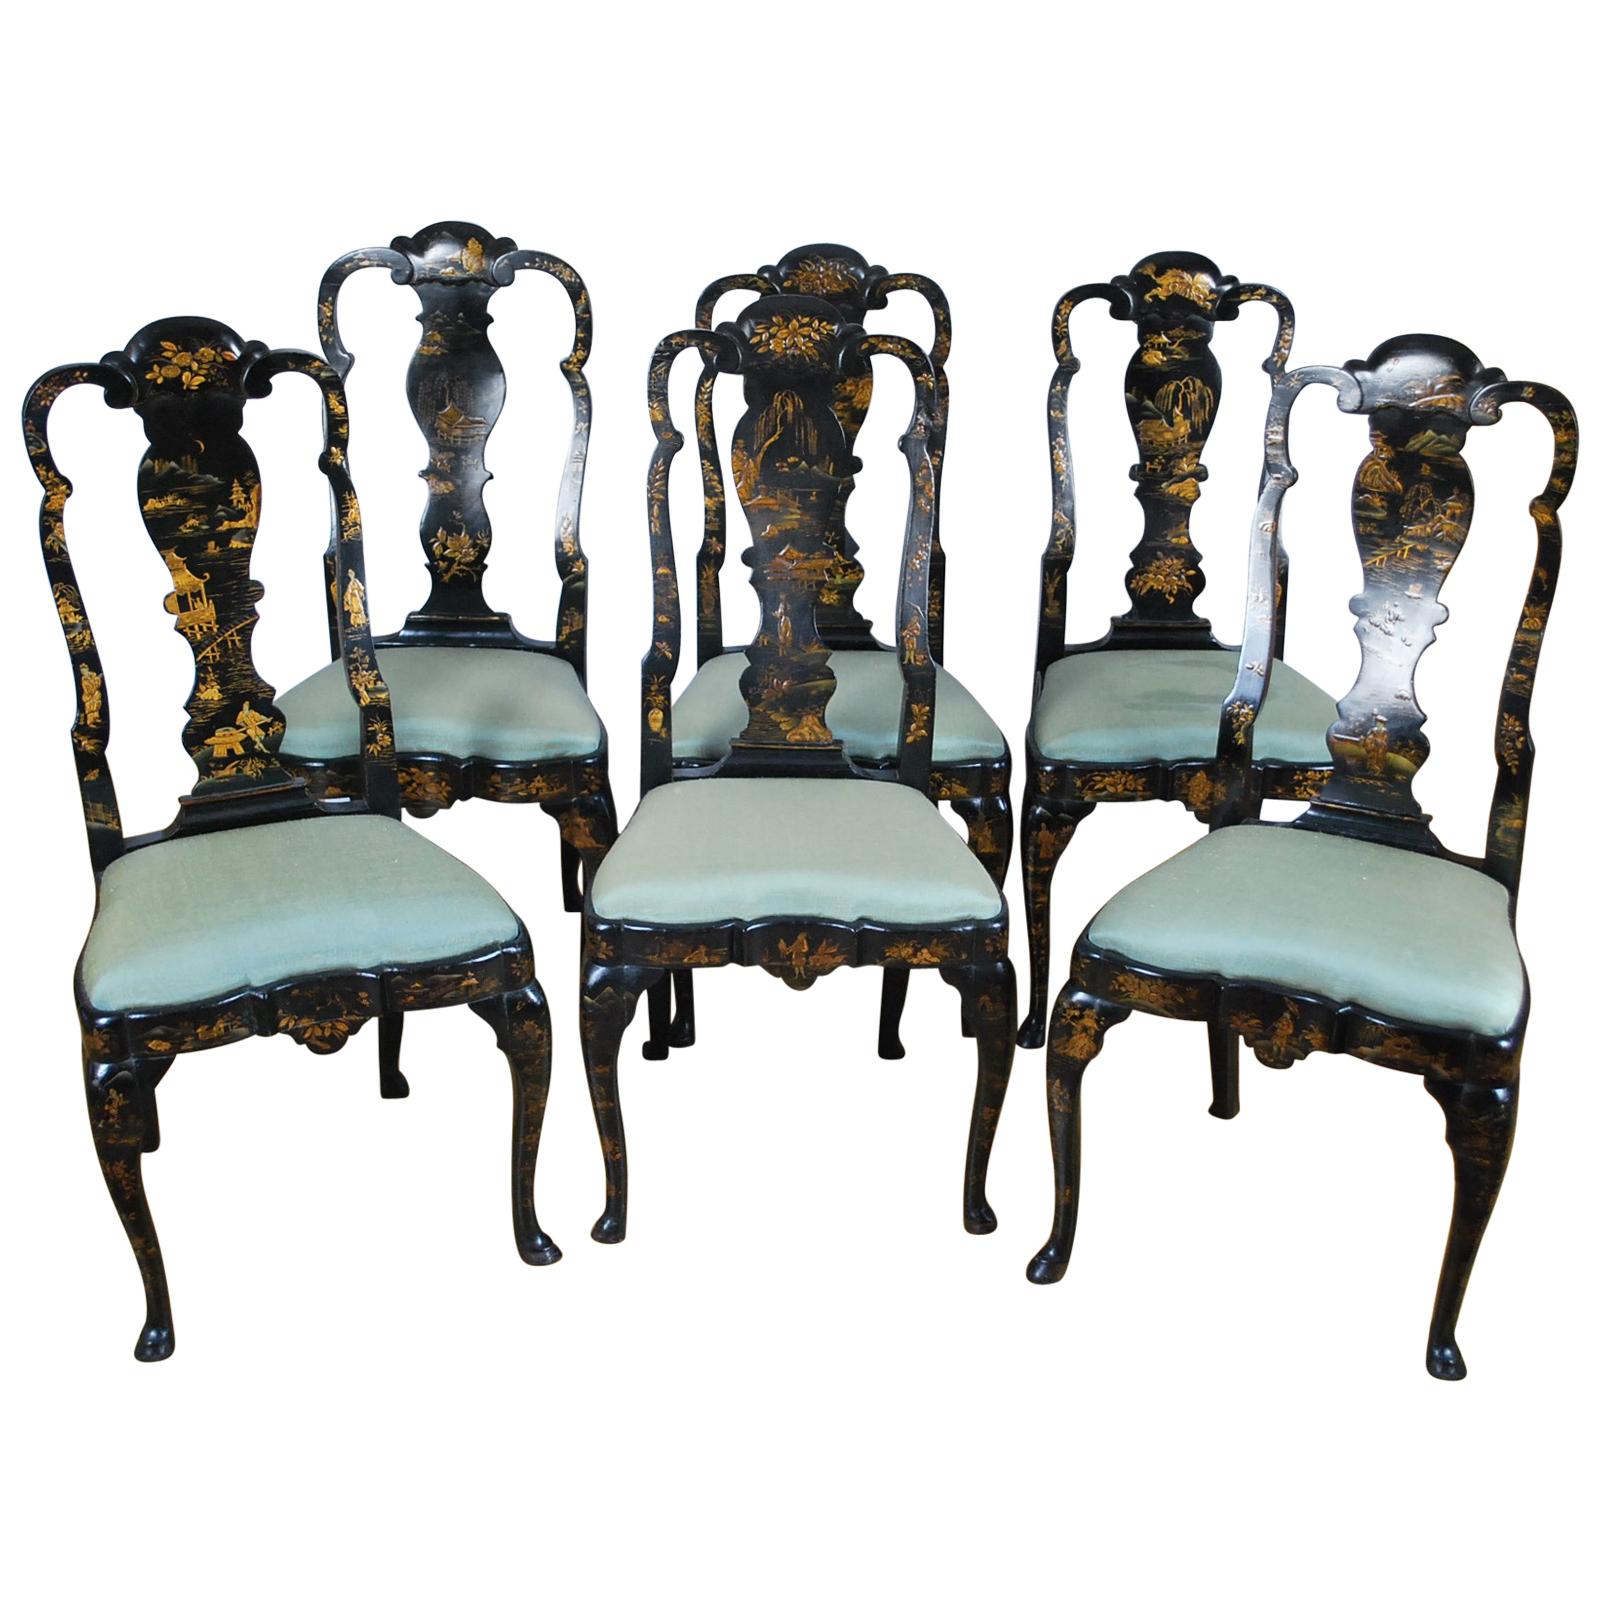 Six antique Georgian Dutch Lacquer Chairs 'Property of Admiral David Beatty' For Sale